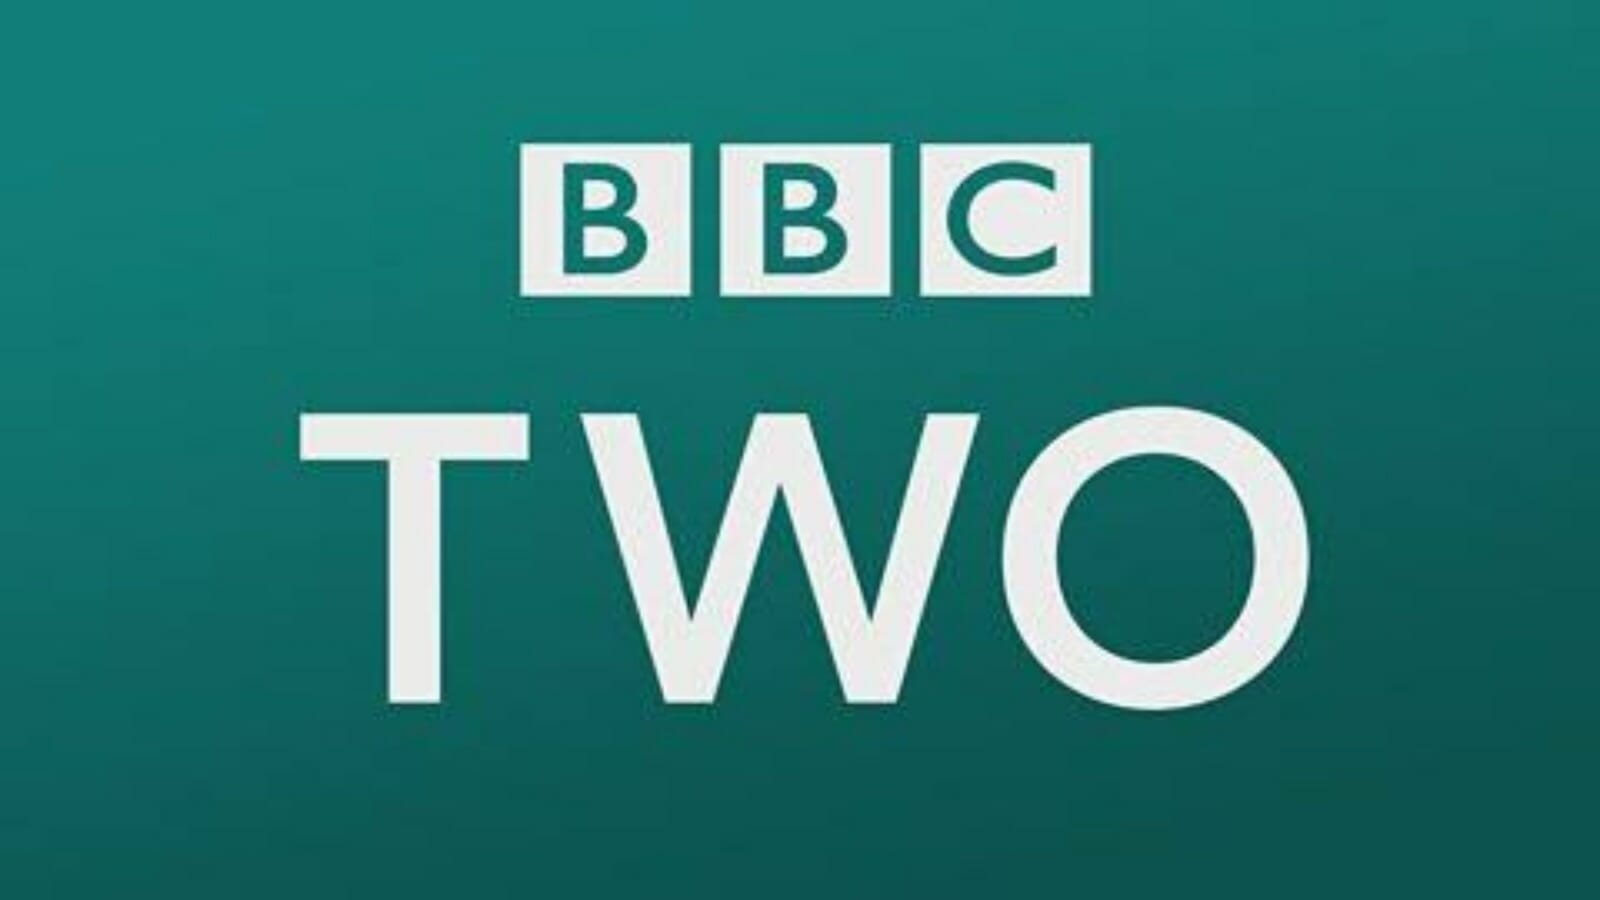 The new docu-series will air on BBC Two